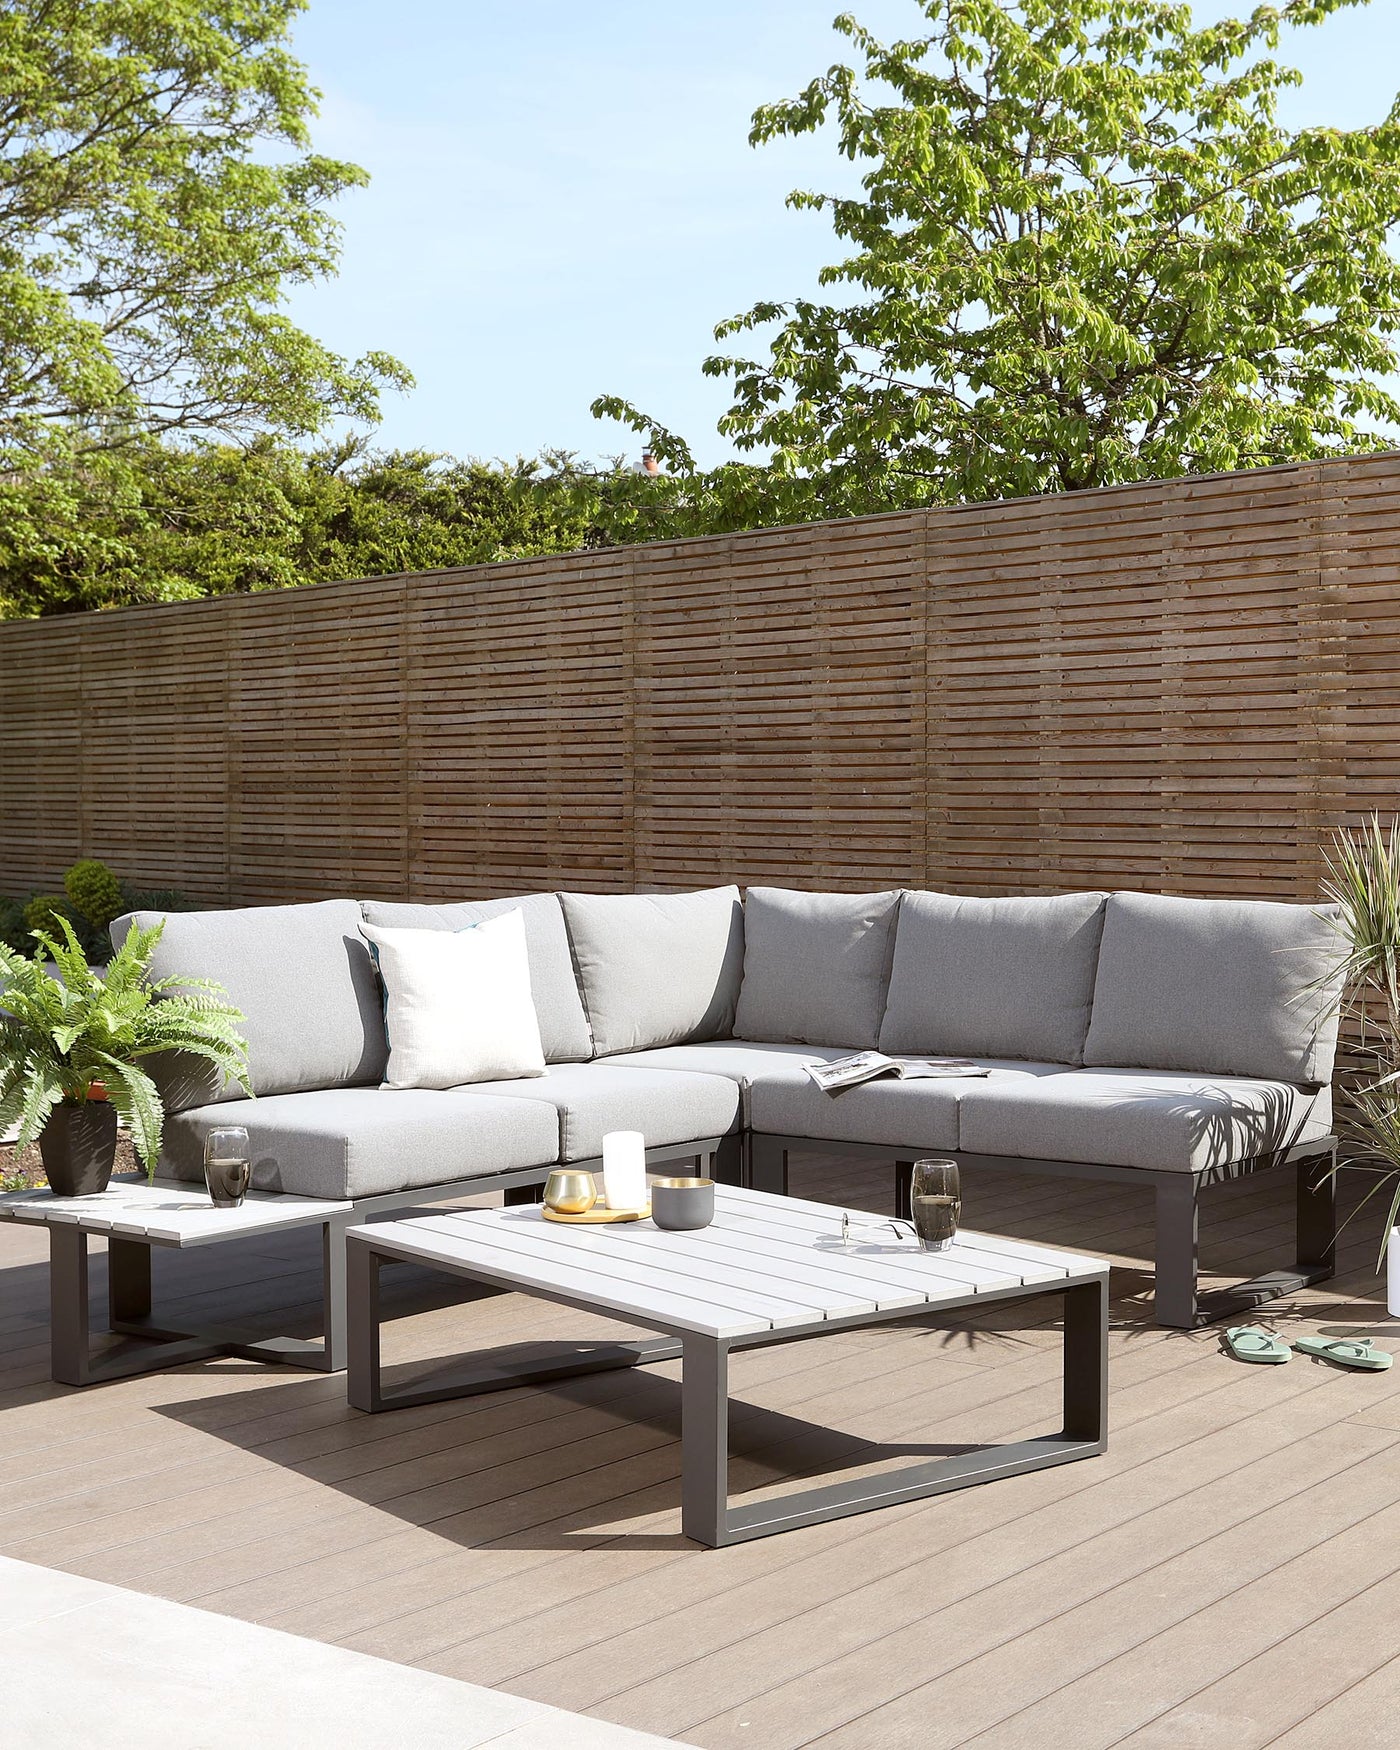 Outdoor patio furniture consisting of an L-shaped sectional sofa with light grey cushions and a matching low-profile rectangular coffee table in a grey finish, set on a wooden deck with decorative plants and a slatted privacy screen in the background.